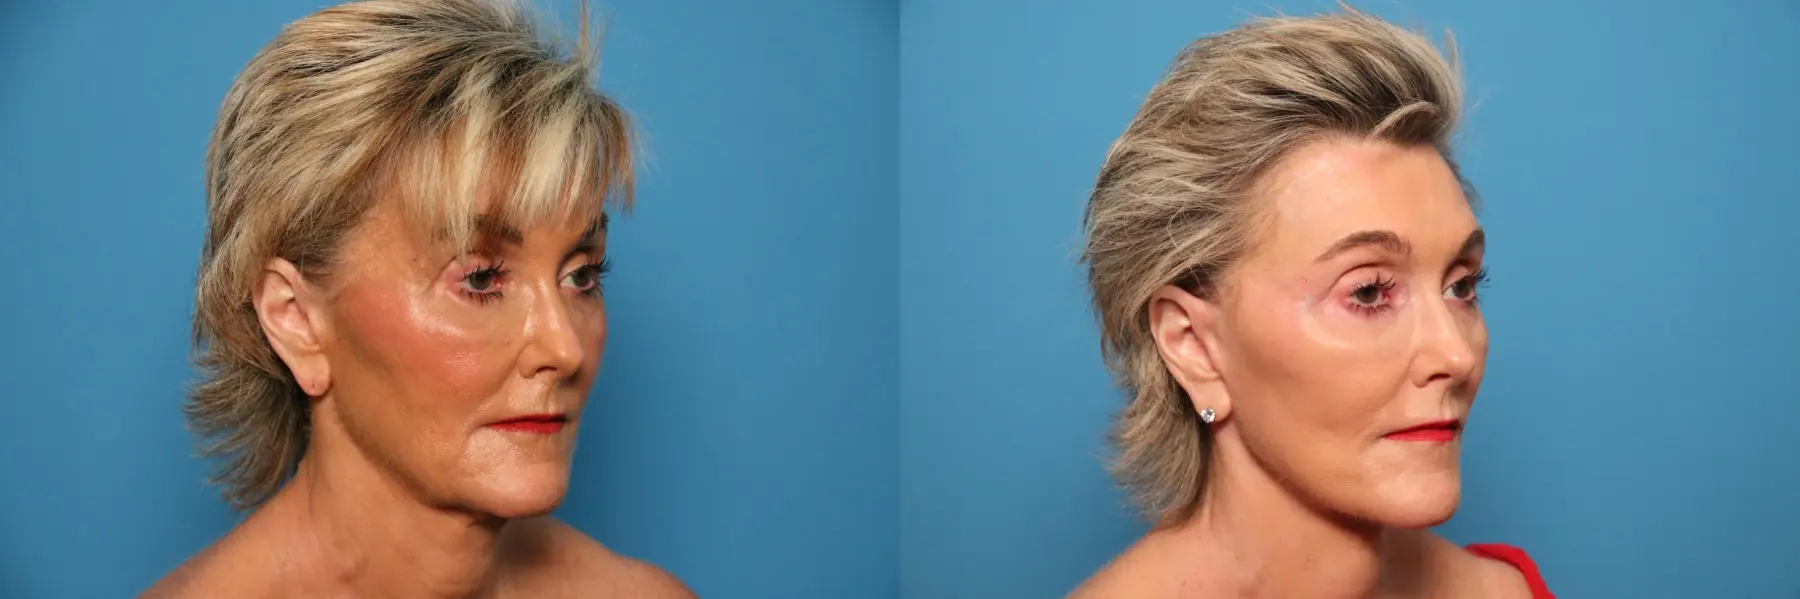 Mini Facelift: Patient 6 - Before and After 4